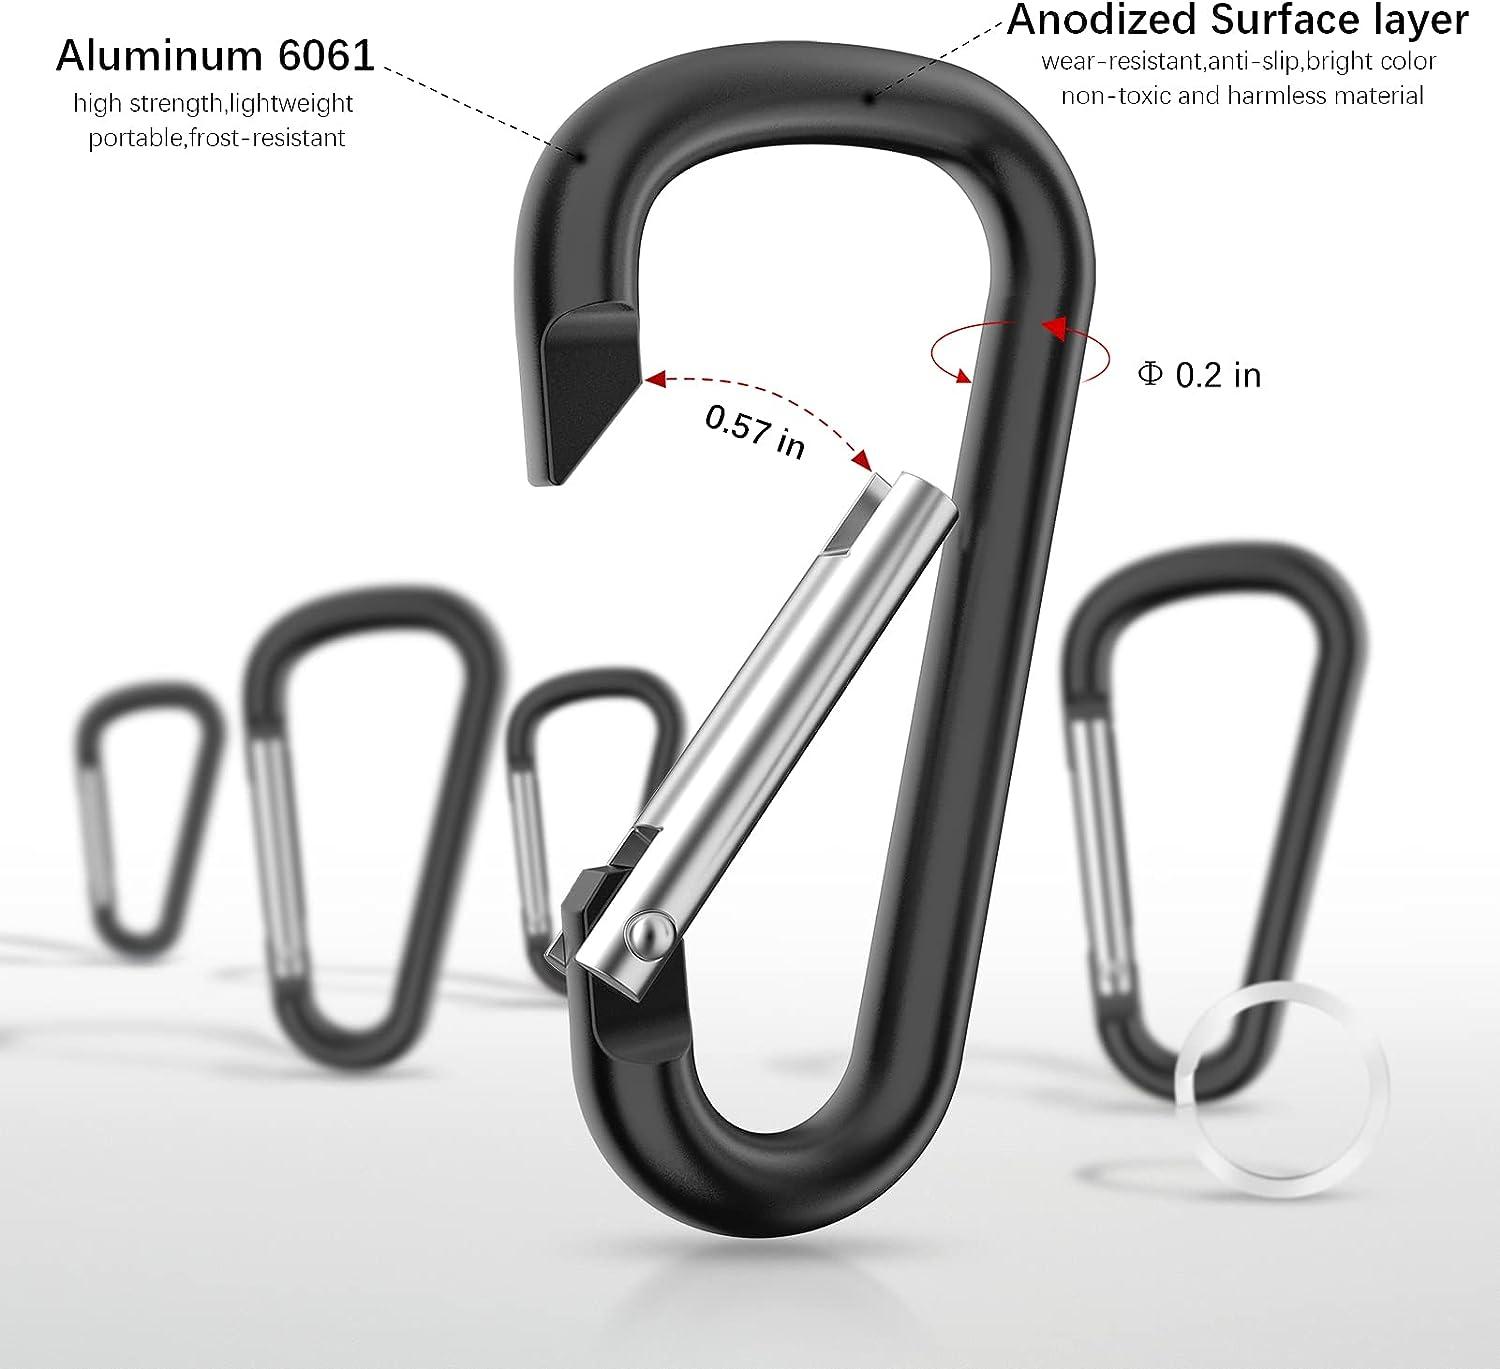 2.25 Carabiner Keychain, Small Carabiner Clip In Many Colors